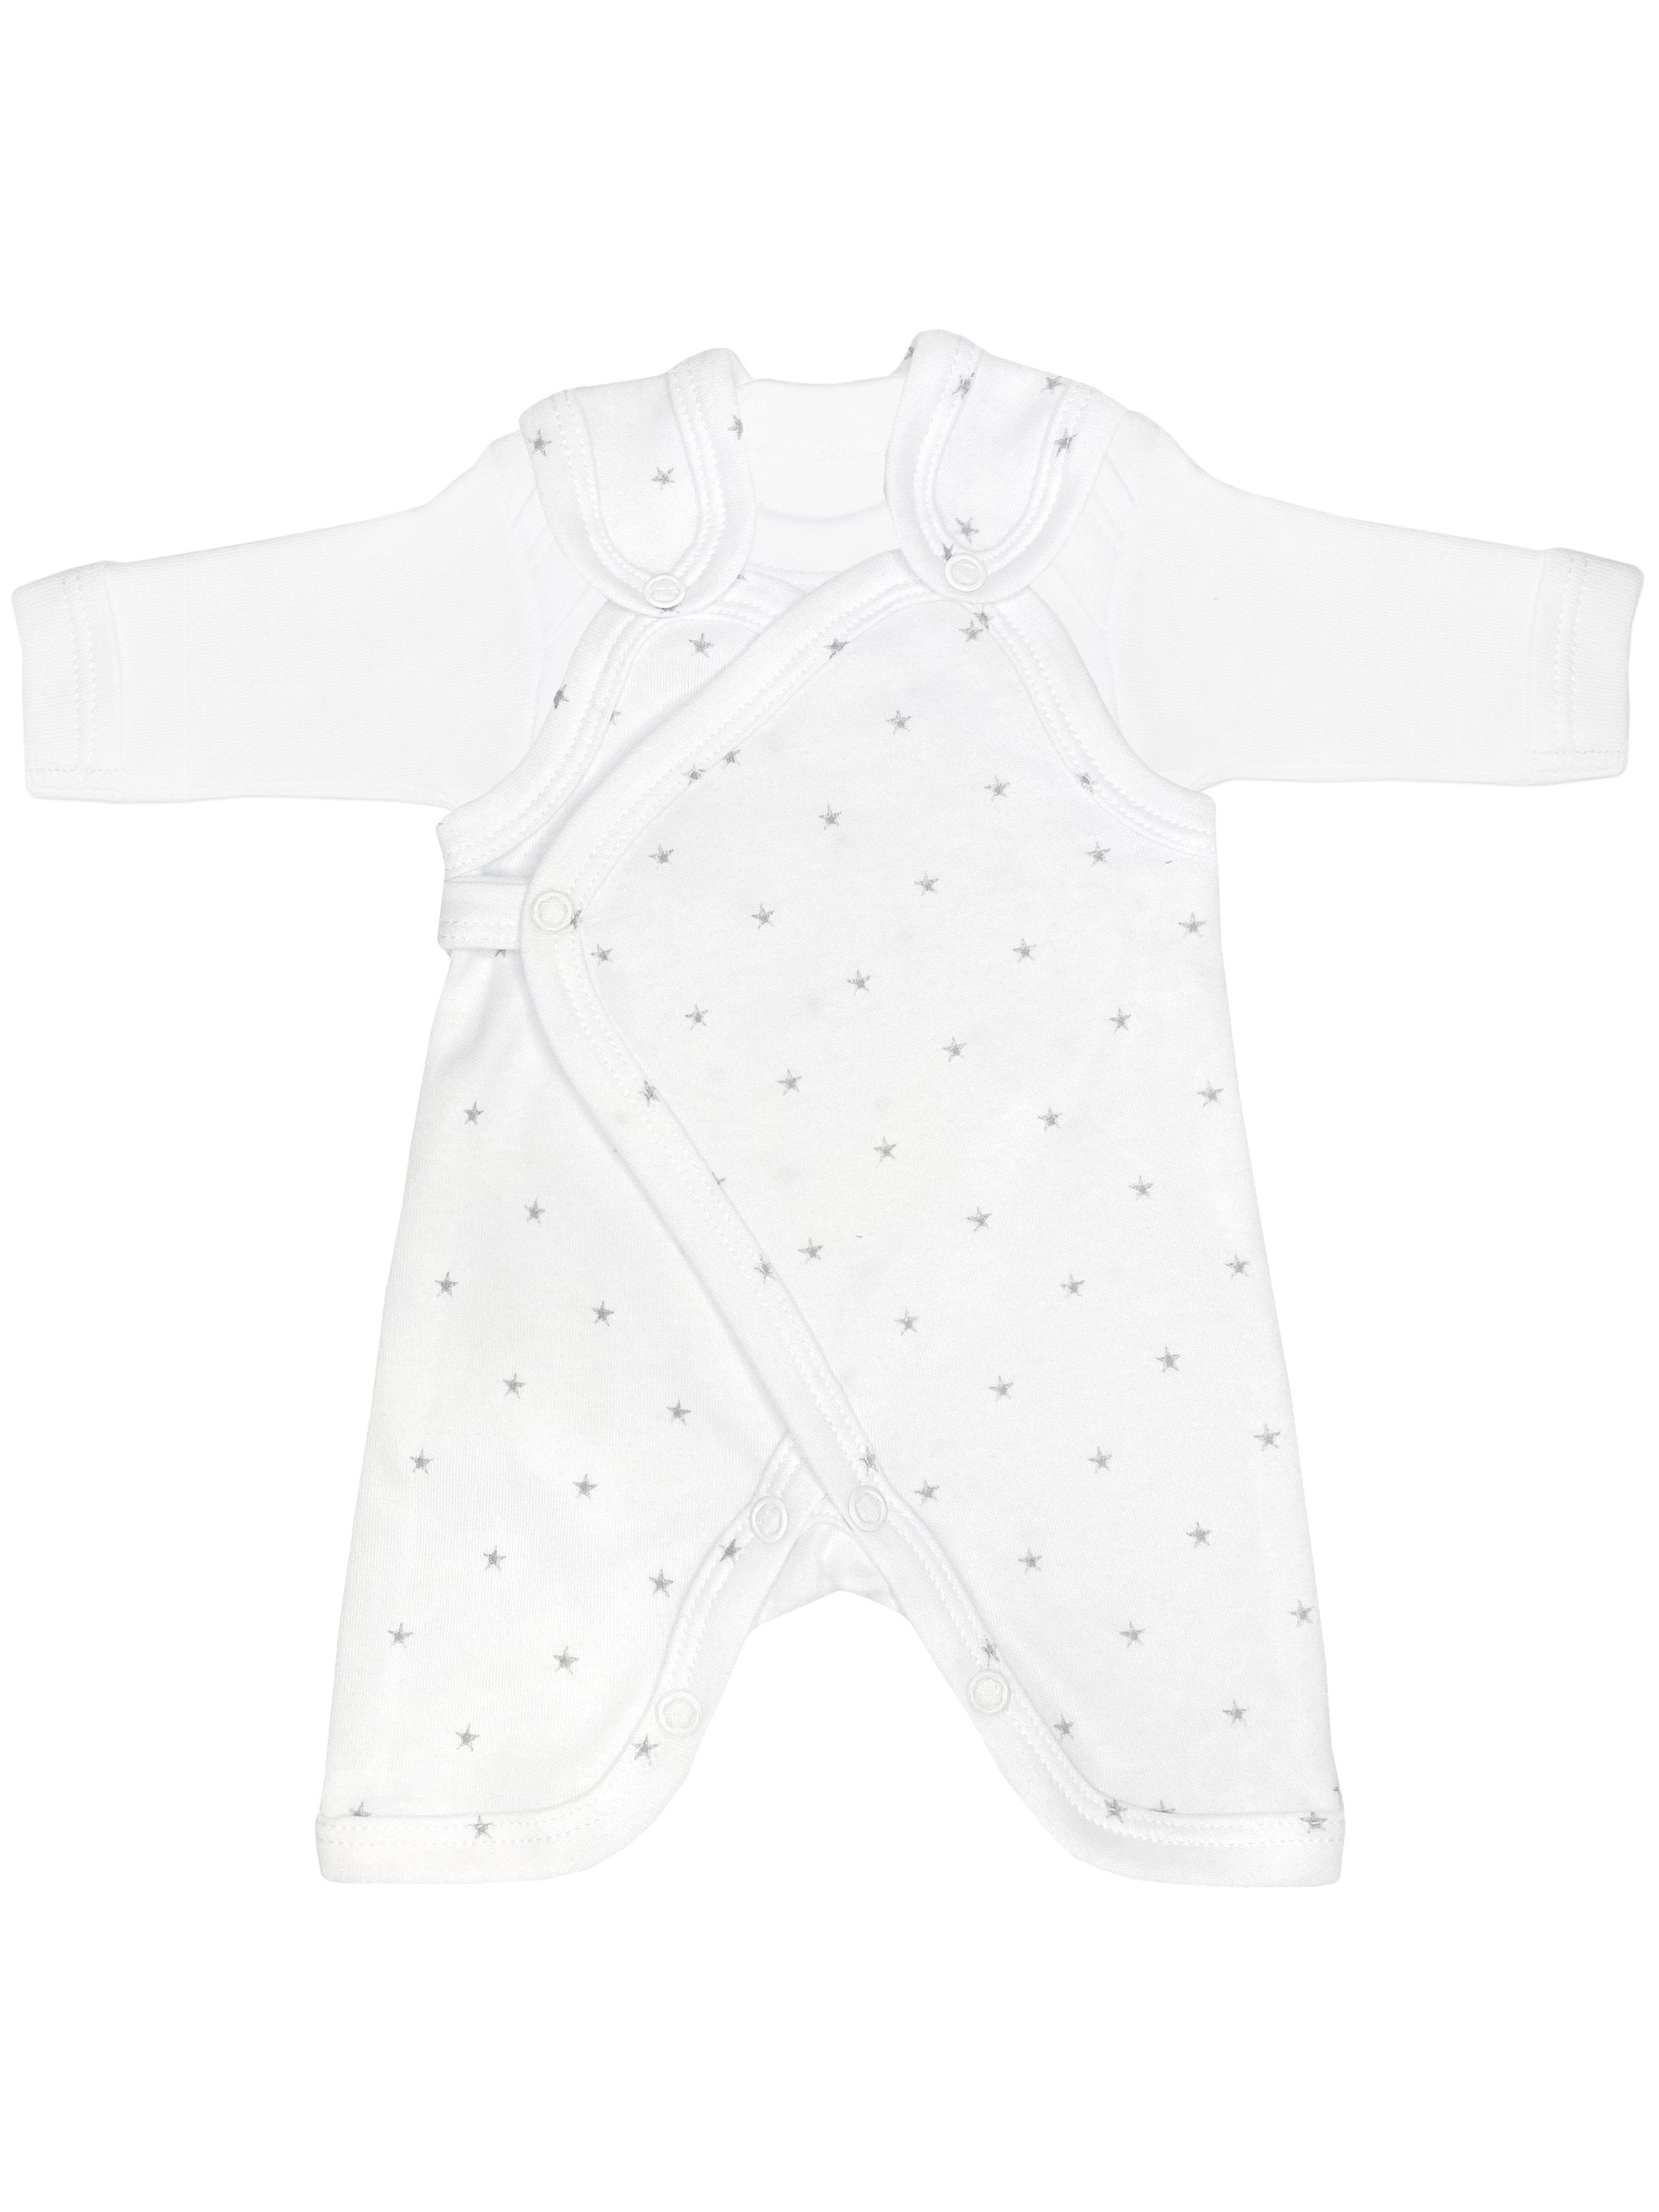 Early Baby Top & Dungarees Set - White with Stars - Dungaree - Lorita